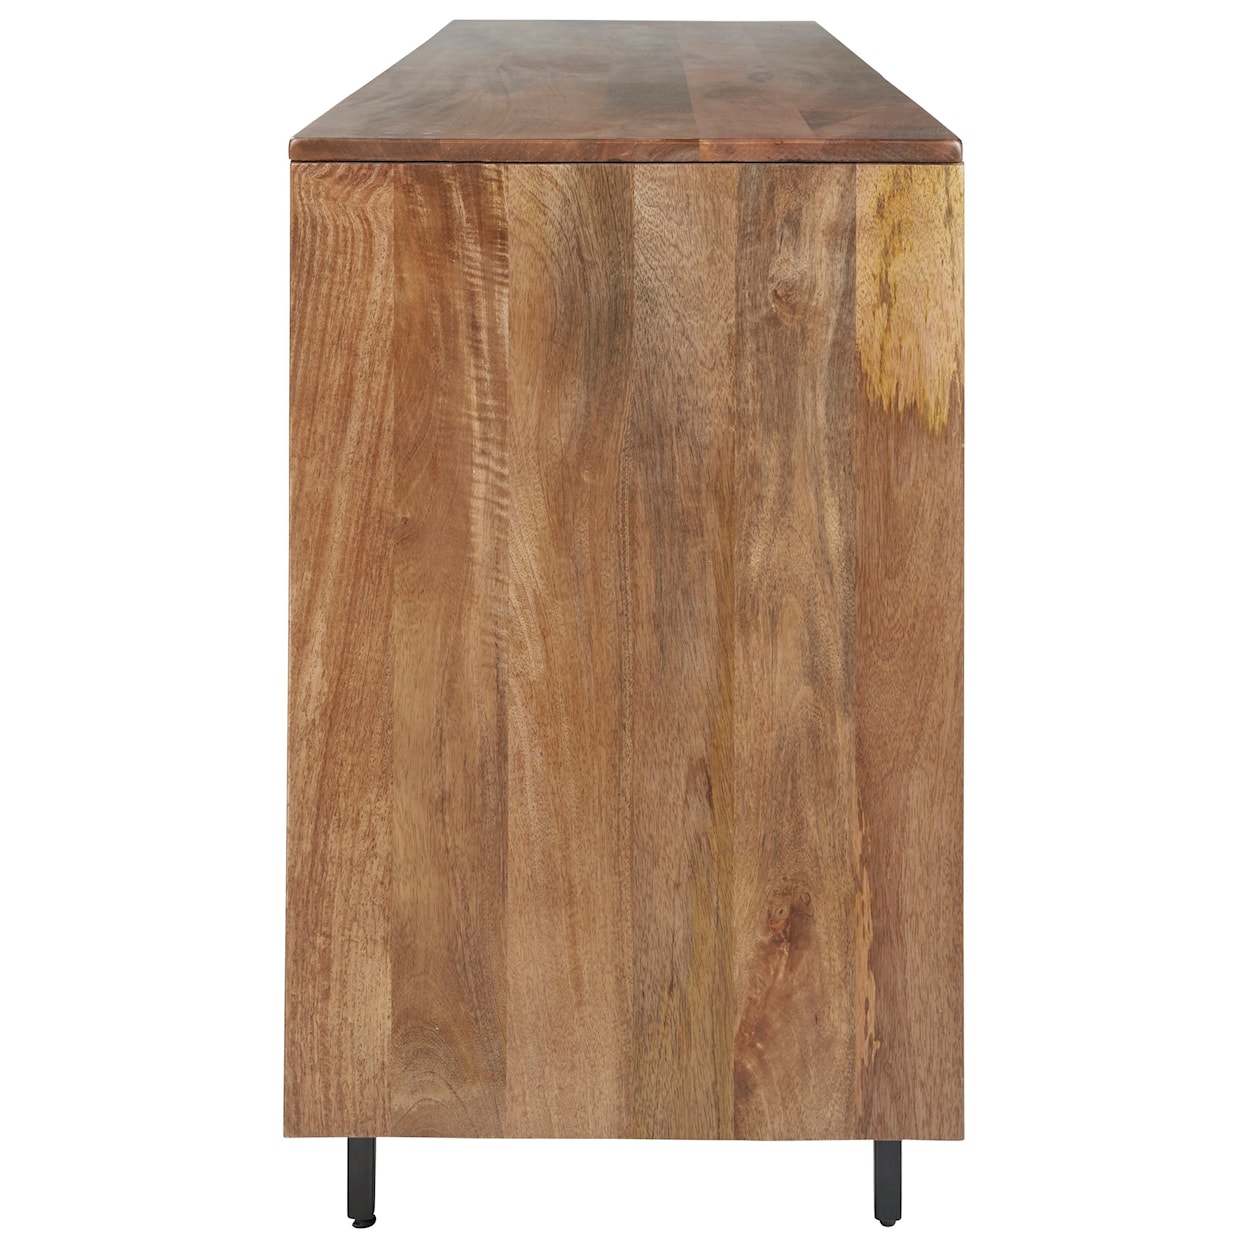 Signature Design by Ashley Freedman Accent Cabinet